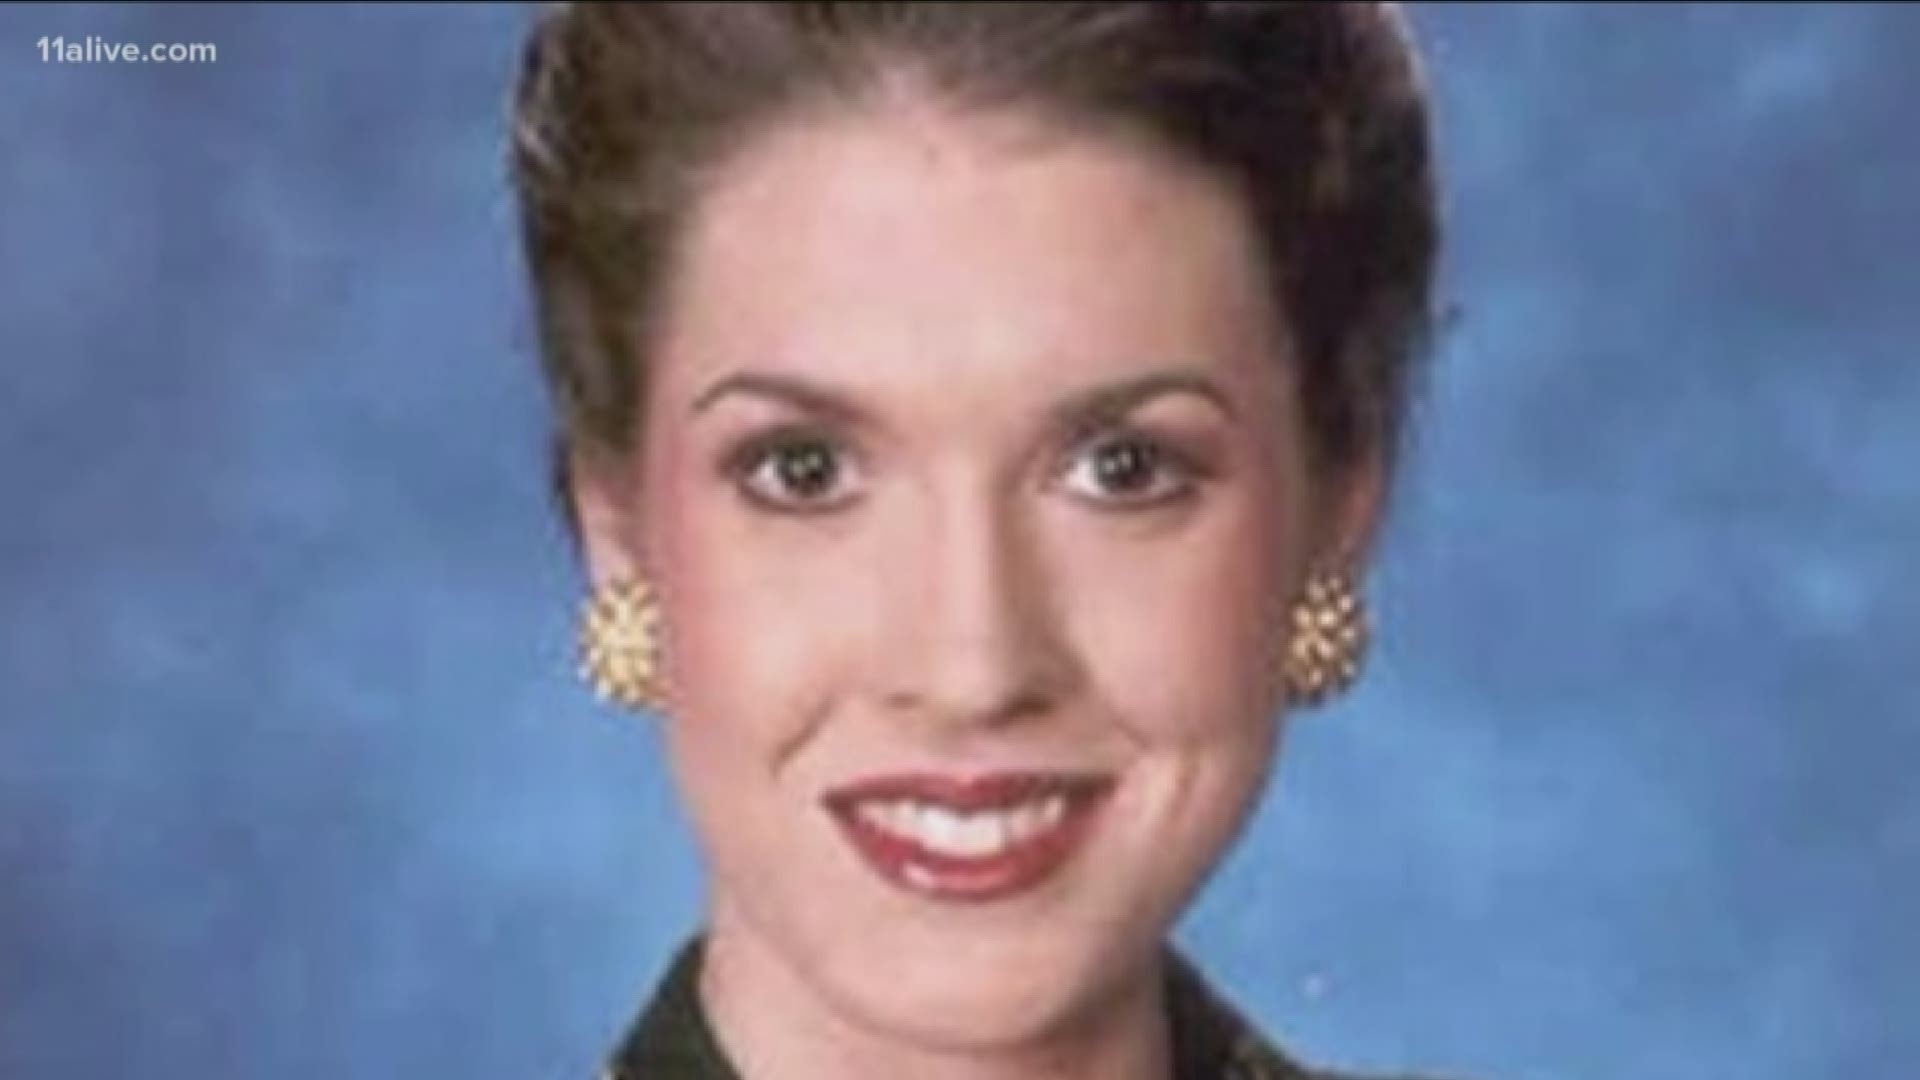 The murder case involving one of two men accused in the 2005 murder of beauty queen and teacher Tara Grinstead is likely headed back to the Georgia Supreme Court.